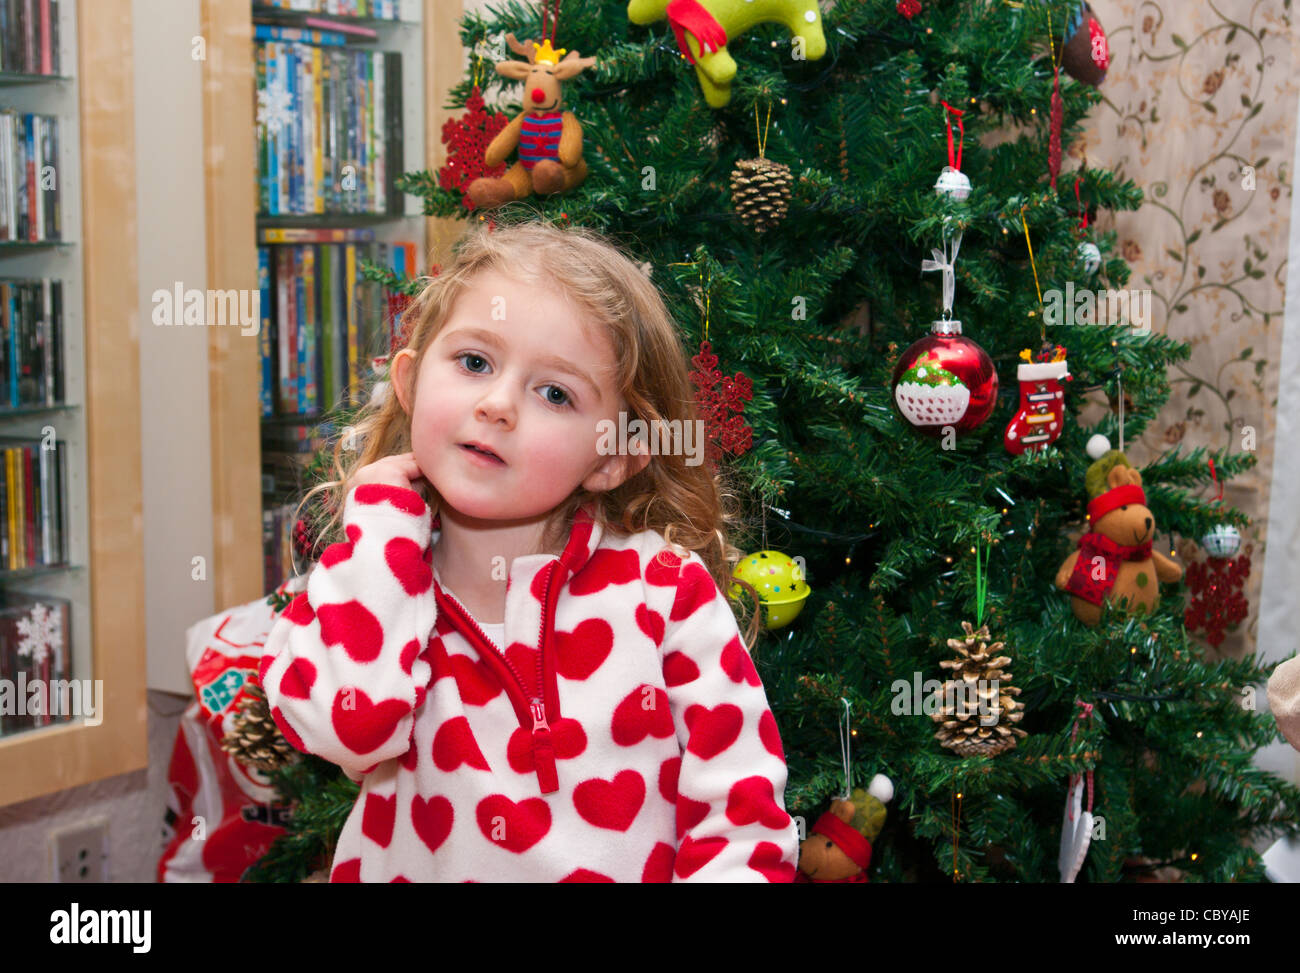 3 Year Old Child Girl Infant Toddler Standing In Front Of A Xmas Christmas Tree Stock Photo